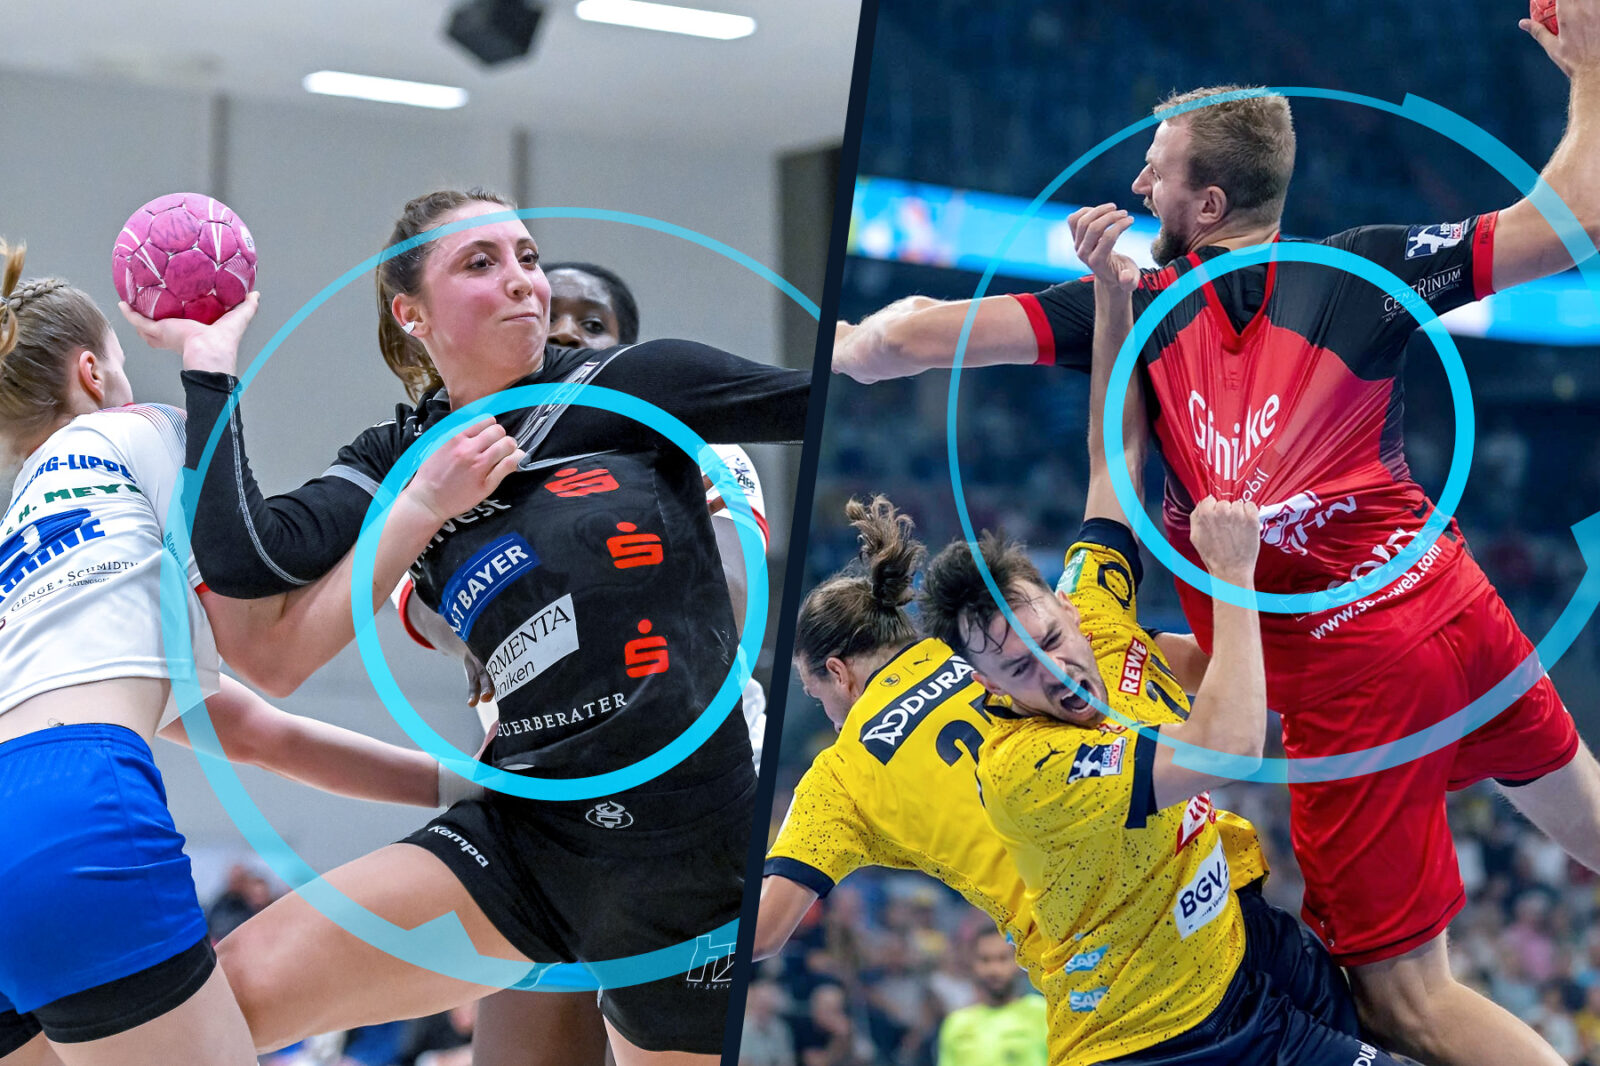 Team handball is hard on the body, so sports data analytics are needed to help with load management.